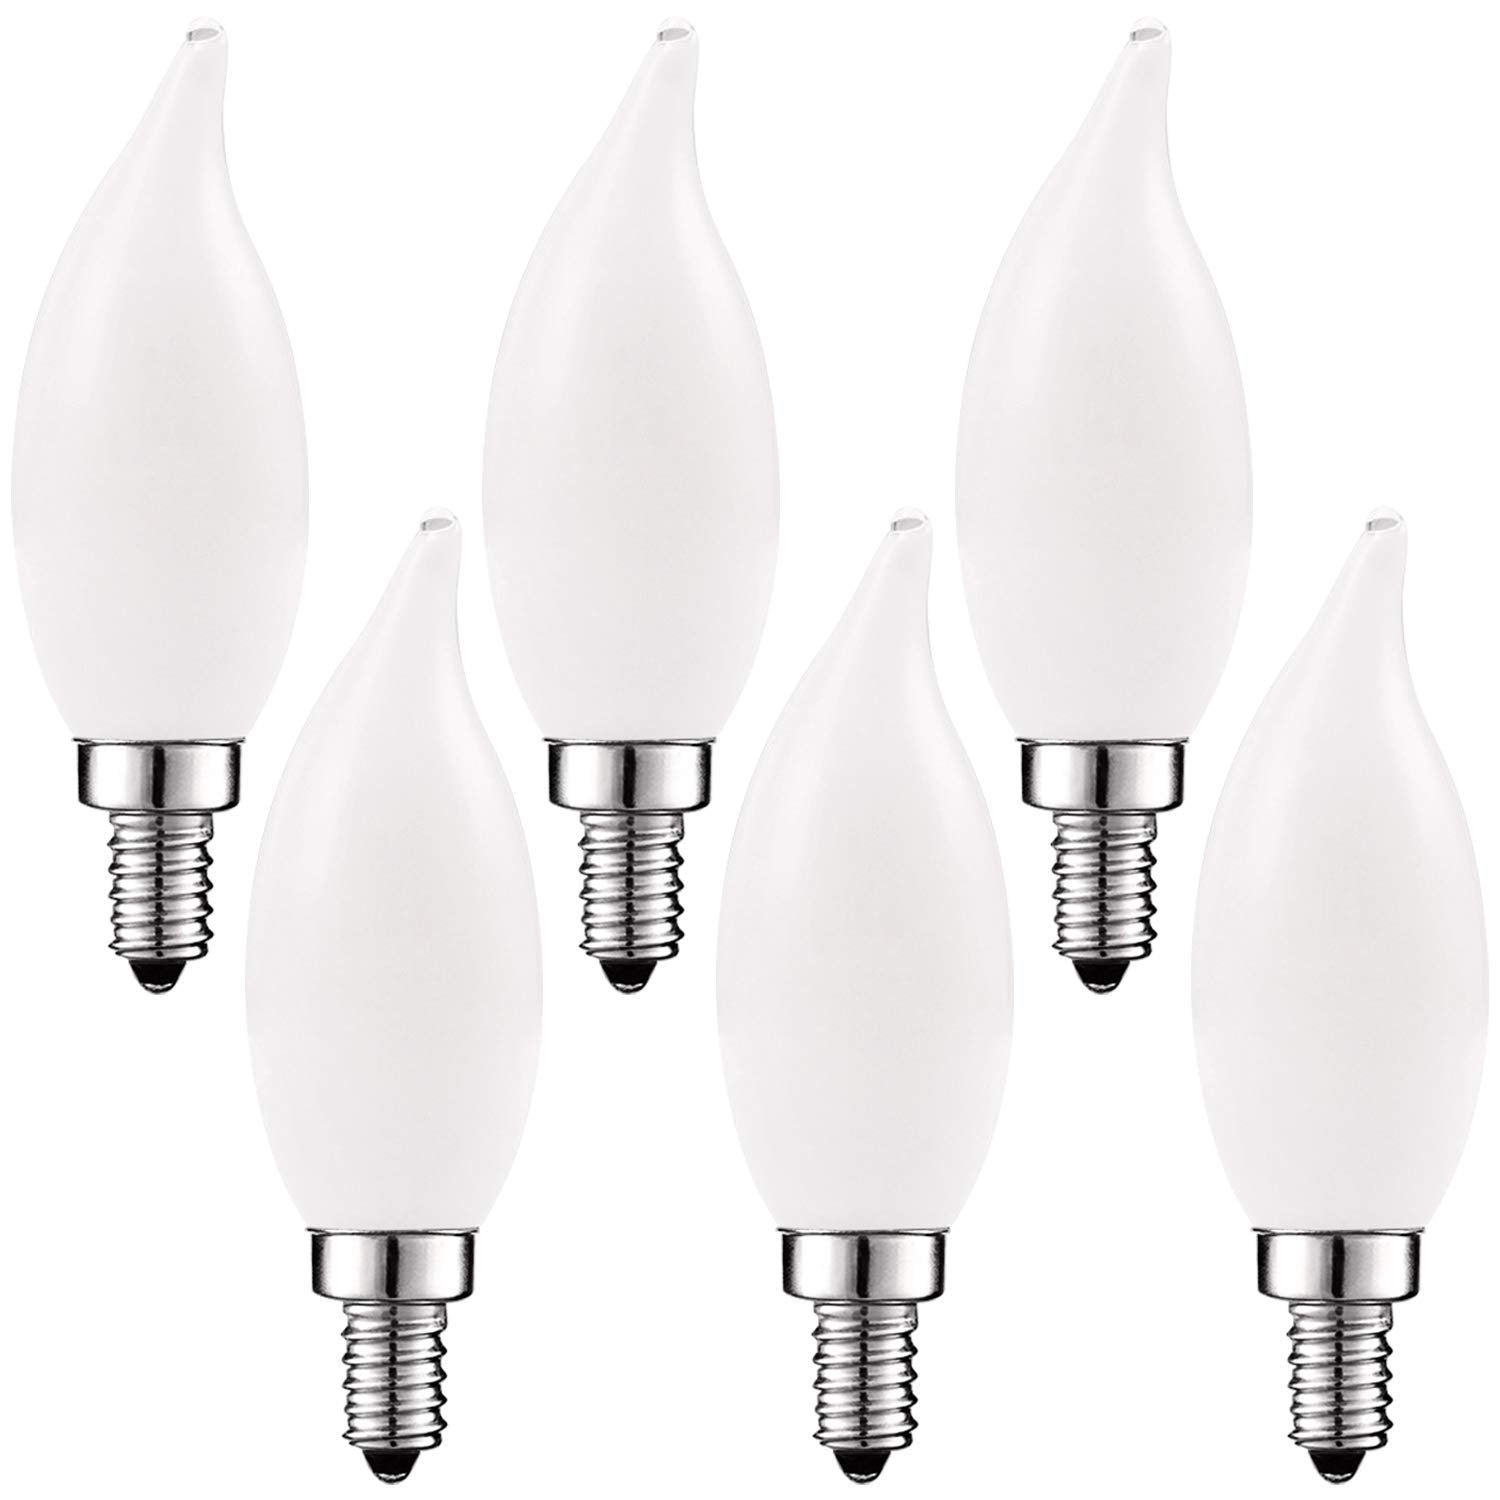 Luxrite Frosted LED Candle Bulbs 40W Equivalent 360lm 2700K UL E12 Base 6Pack eBay